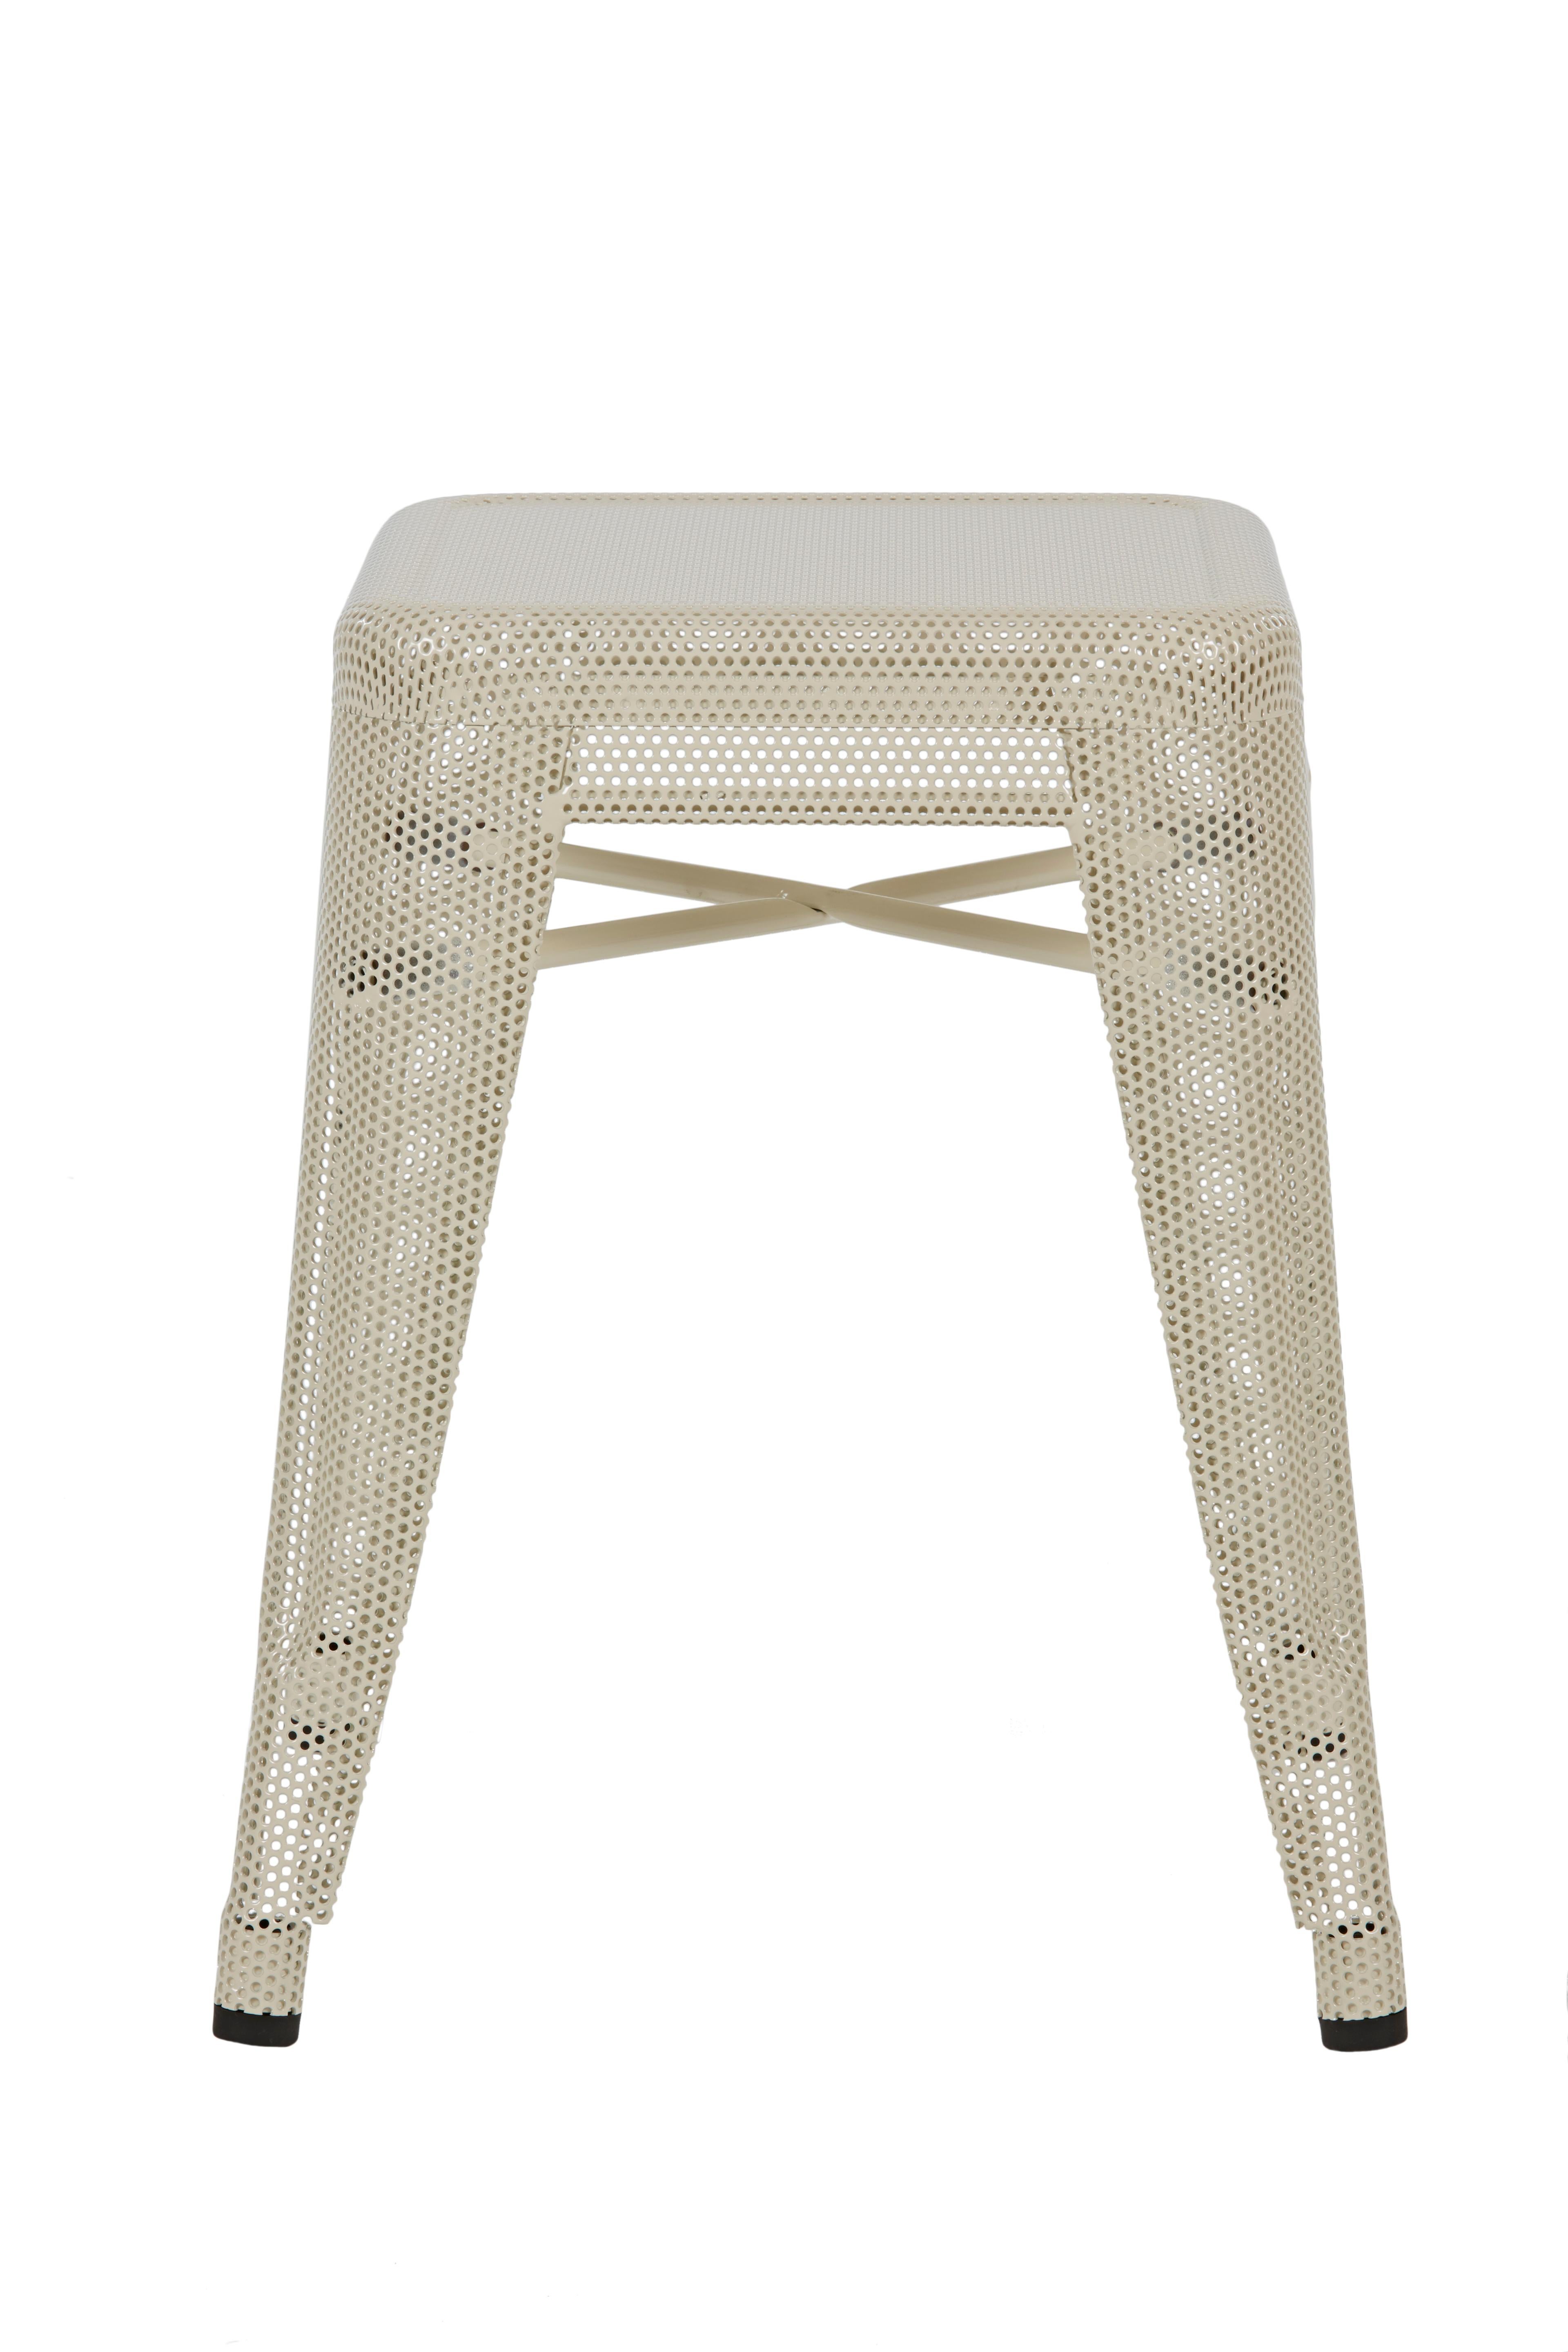 For Sale: White (Ivoire) H Stool 45 Perforated in Essential Colors by Chantal Andriot and Tolix